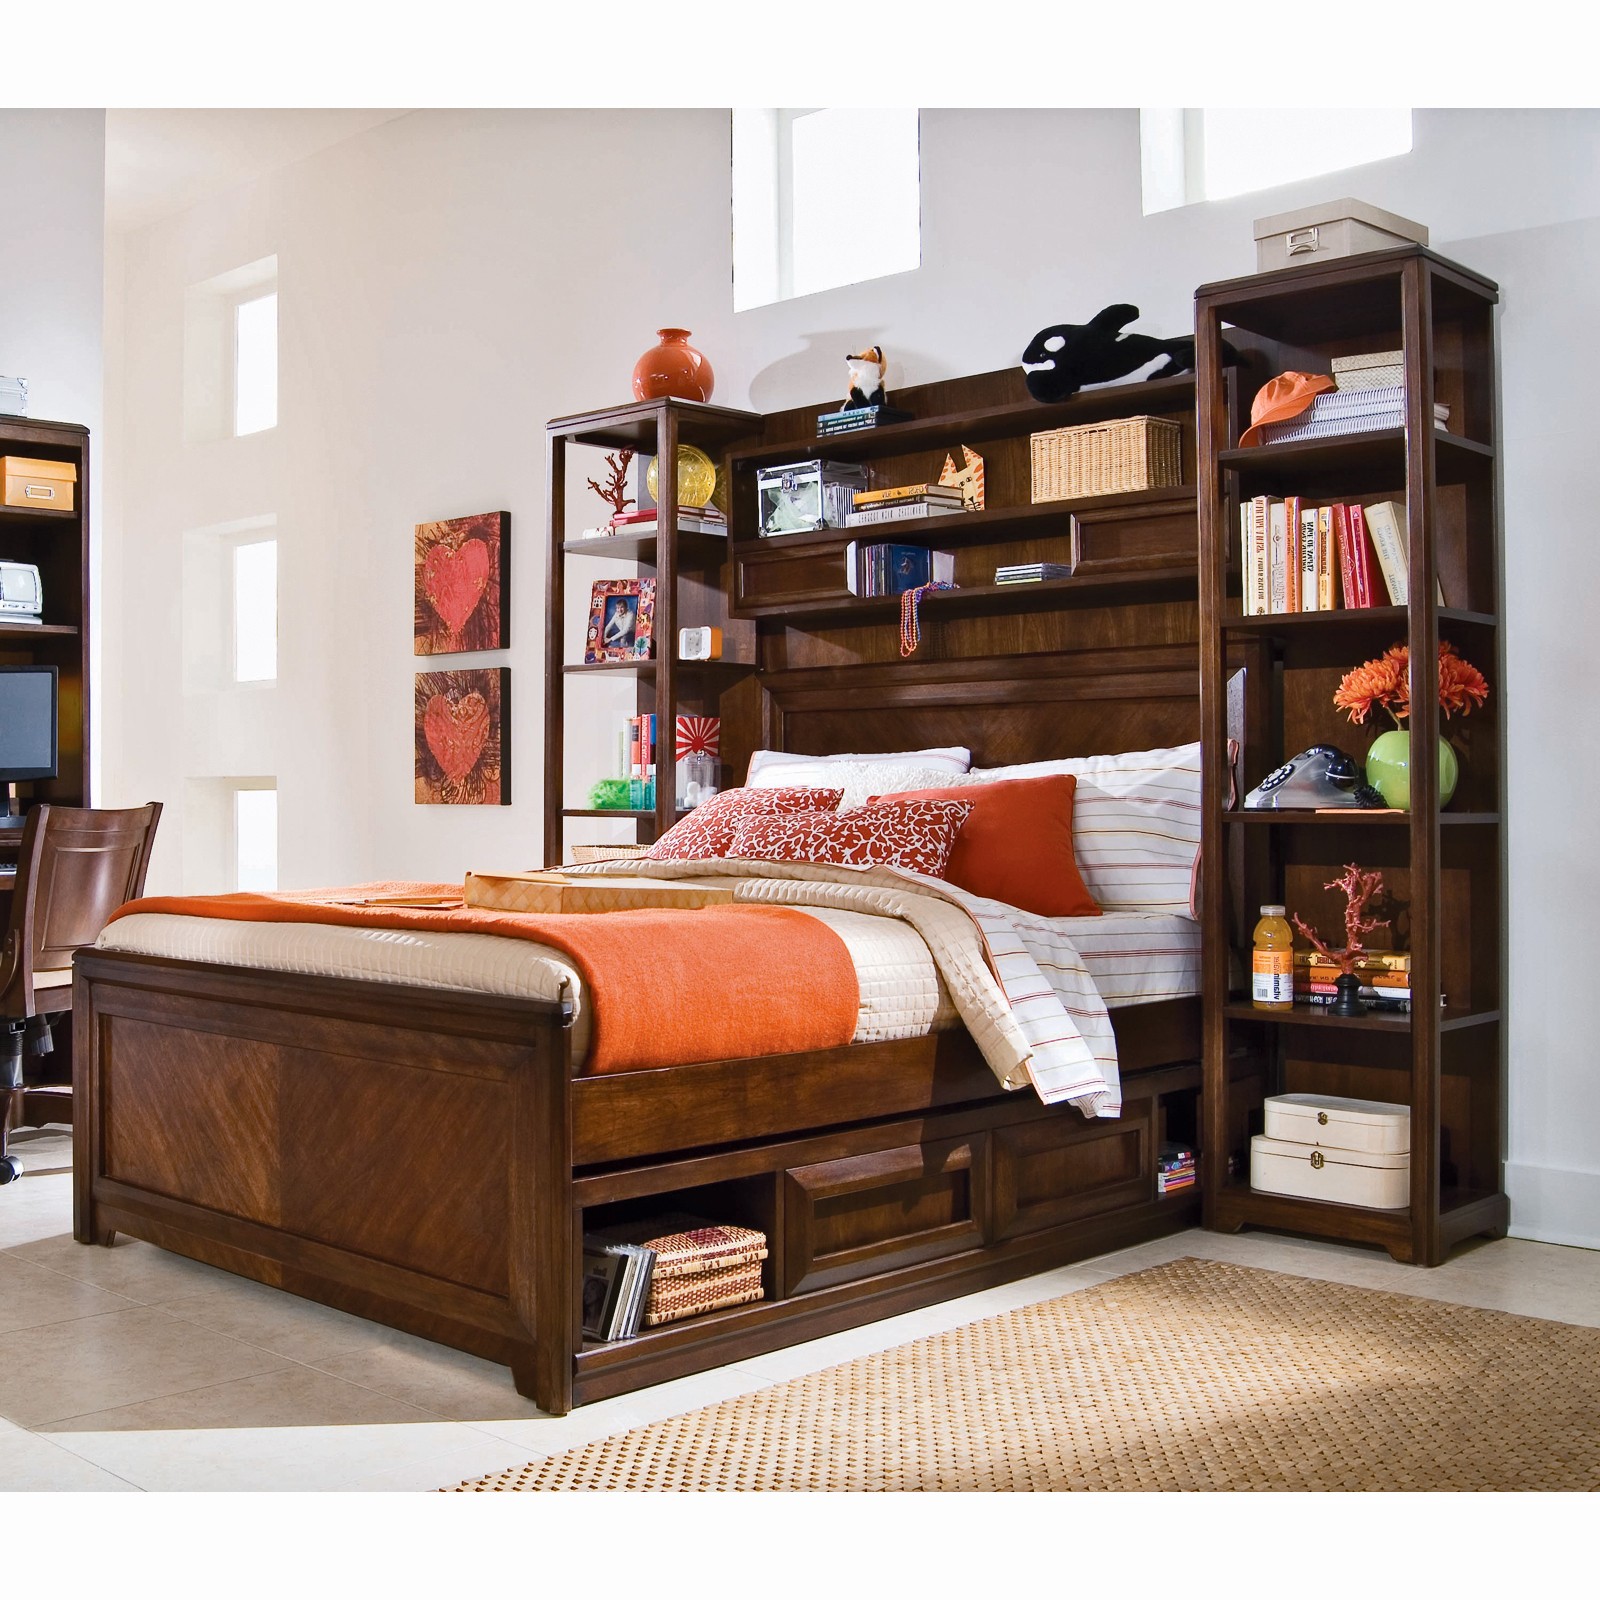 Elite expressions bookcase bed collection kids bookcase